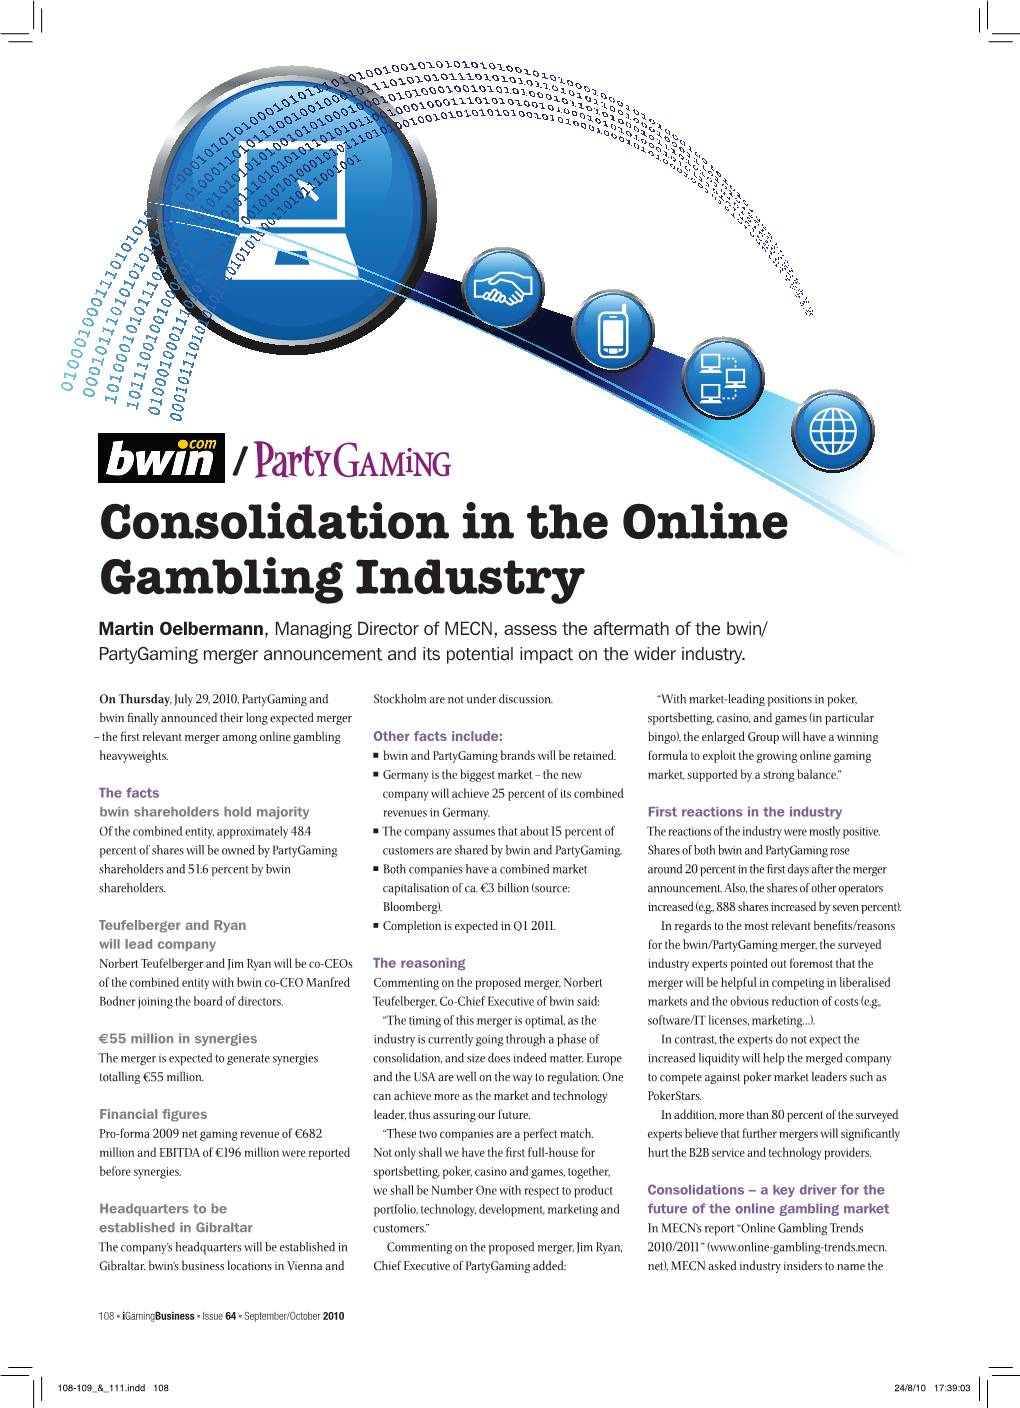 Consolidation in the Online Gambling Industry